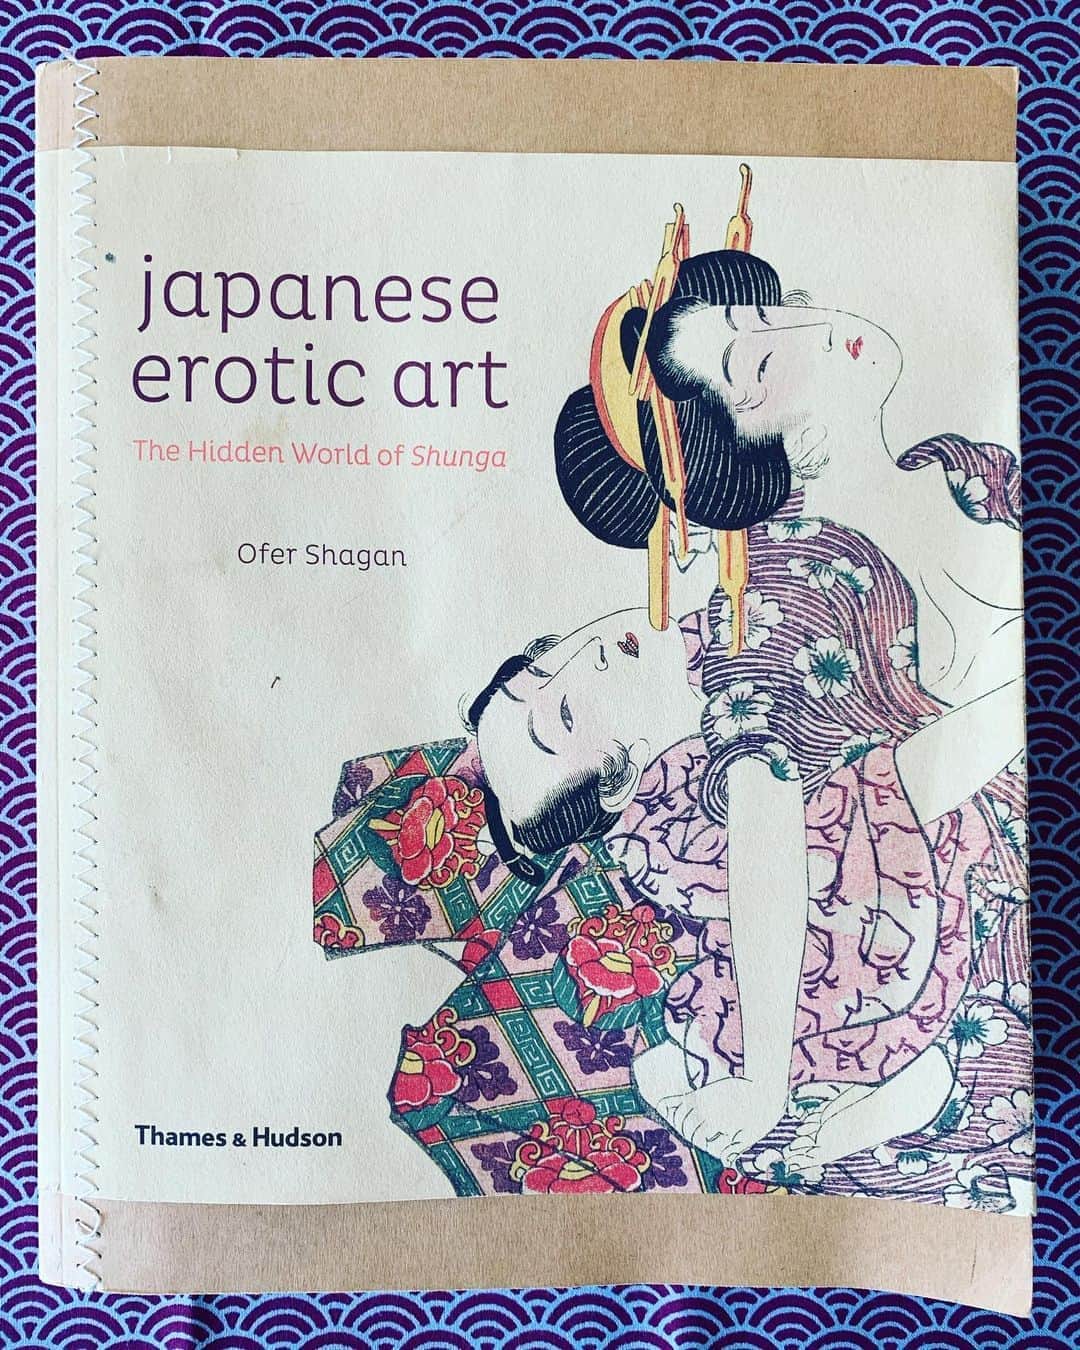 Cherryのインスタグラム：「#bookcoverchallenge  Day 5  The challenge is to help spread the culture of reading. I'll post my favorite books, one a day for a week. No description of the book, just an image of the cover up. I'll pass the baton to one person each time and ask them to join us.  I pass the baton to him @smarch  His house is almost library feeling that many rare books hidden in bookshelf.」